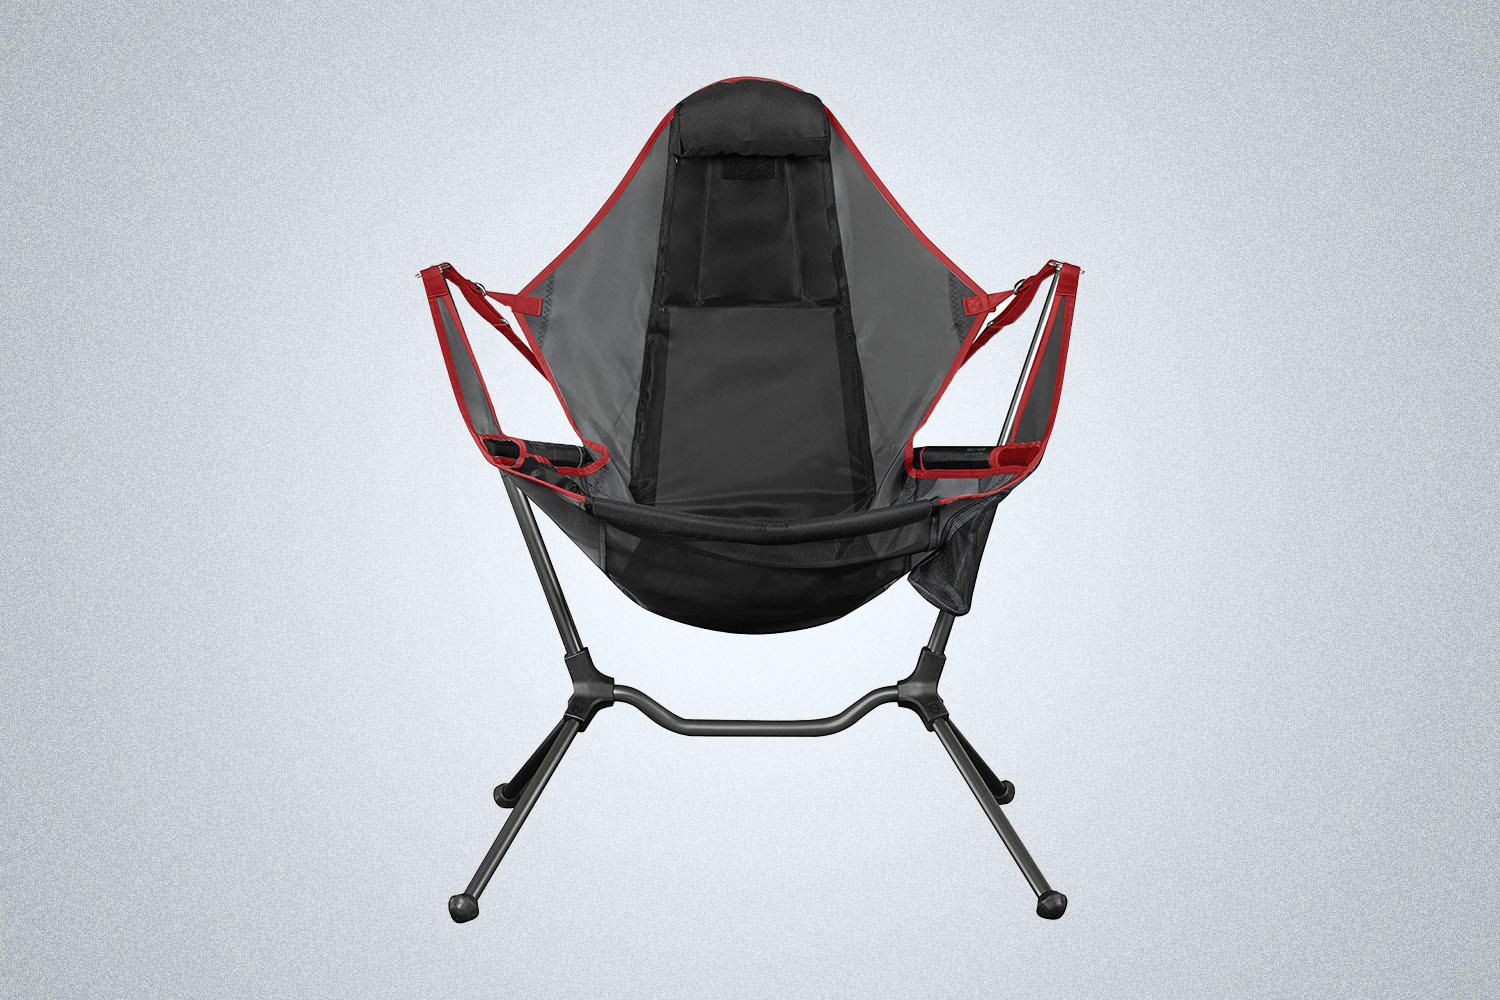 The NEMO Equipment Stargaze Recliner Camp Chair is perfect for camping and watching the stars in 2021